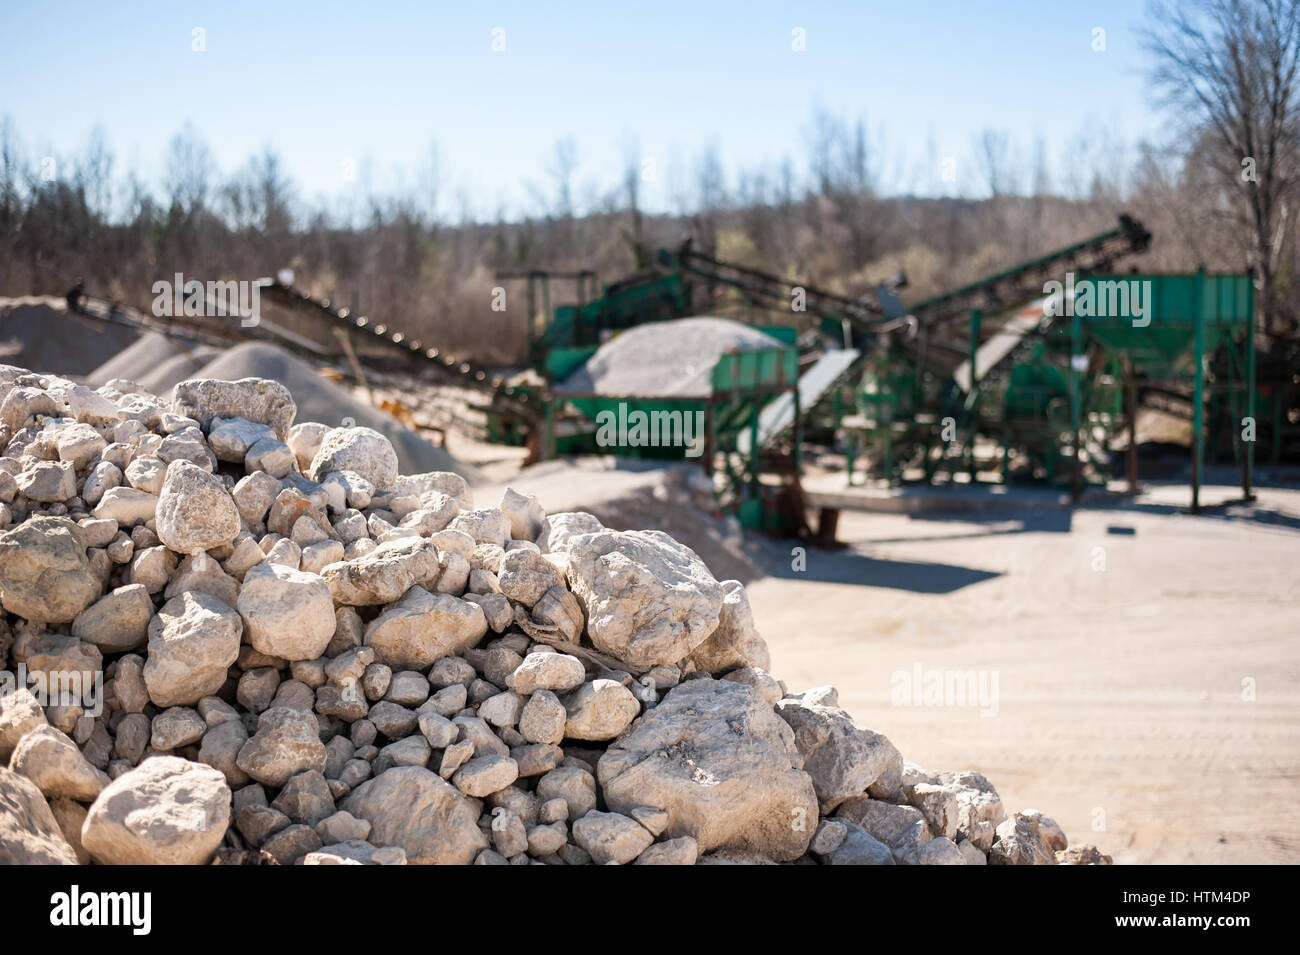 Pile of gravel-rock to be treated. Blurred on background machinery of a gravel pit. Stock Photo